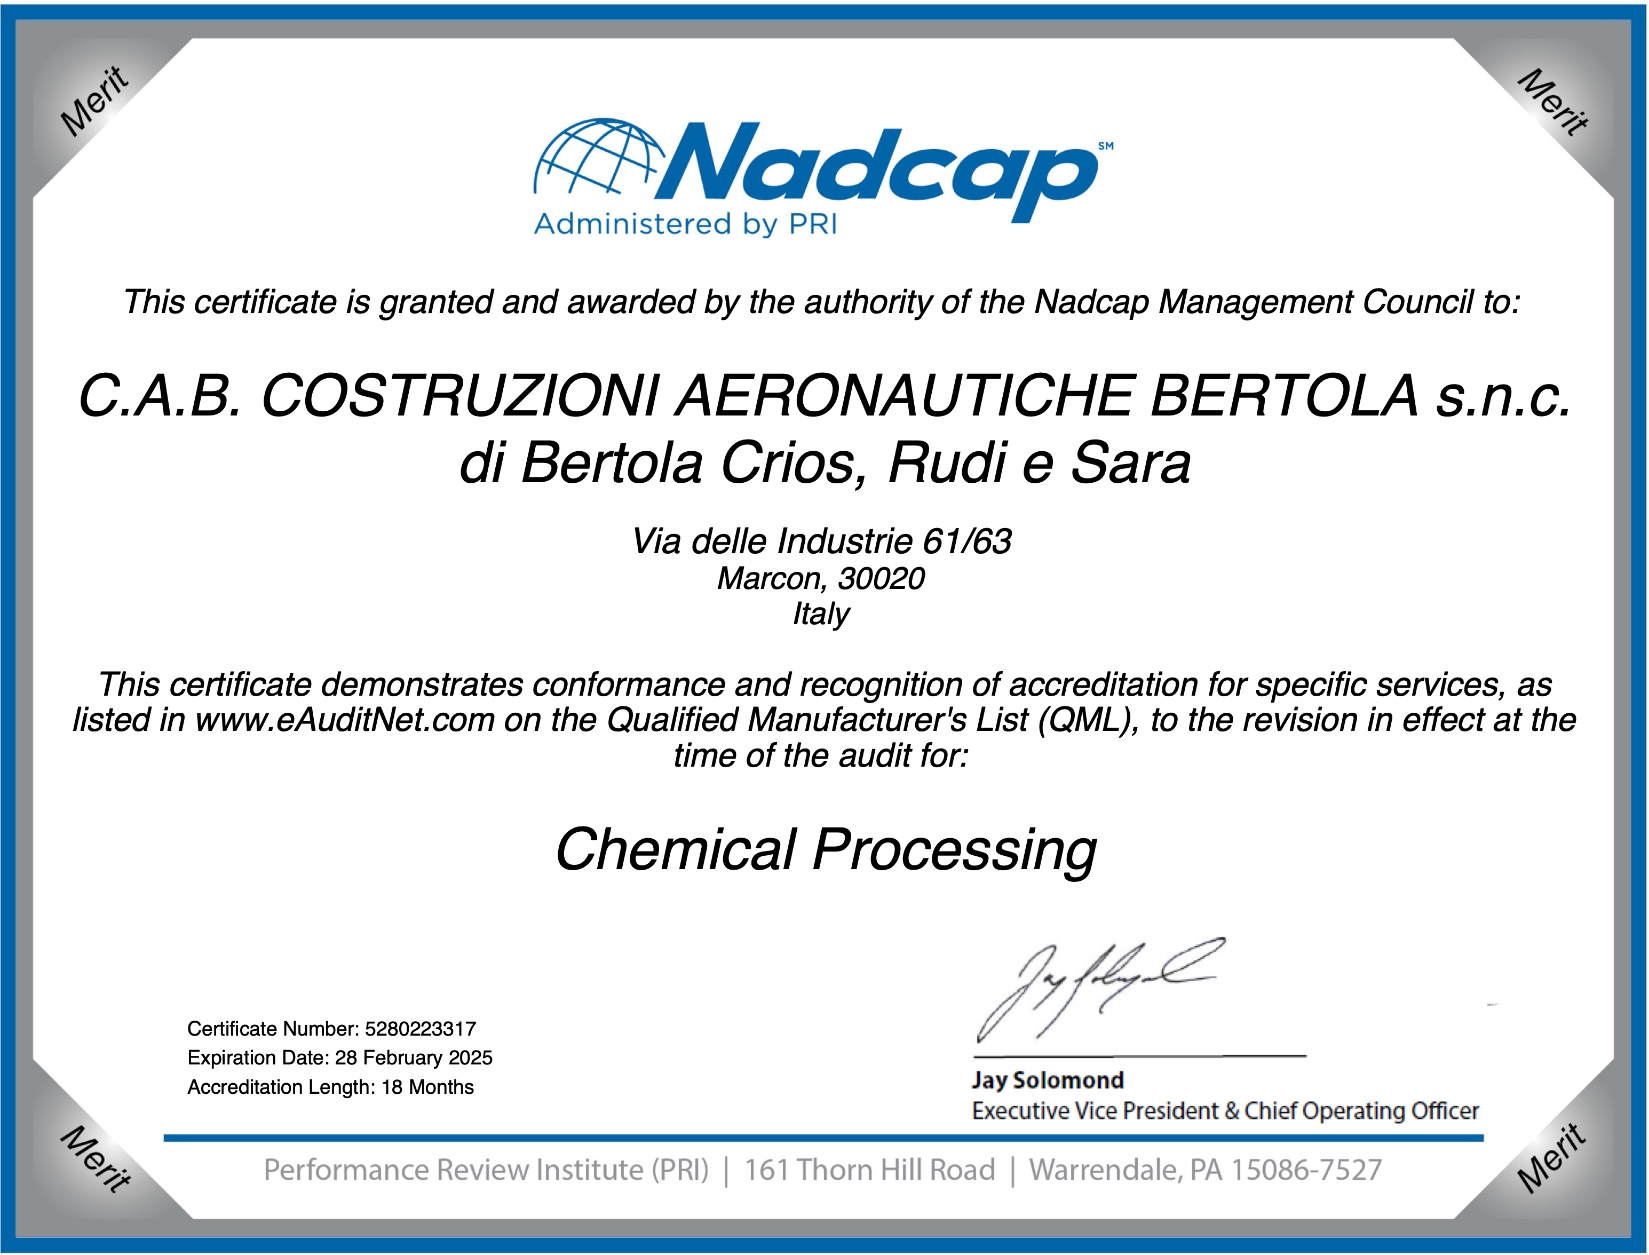 CAB Chemical Processing certified by NADCAP